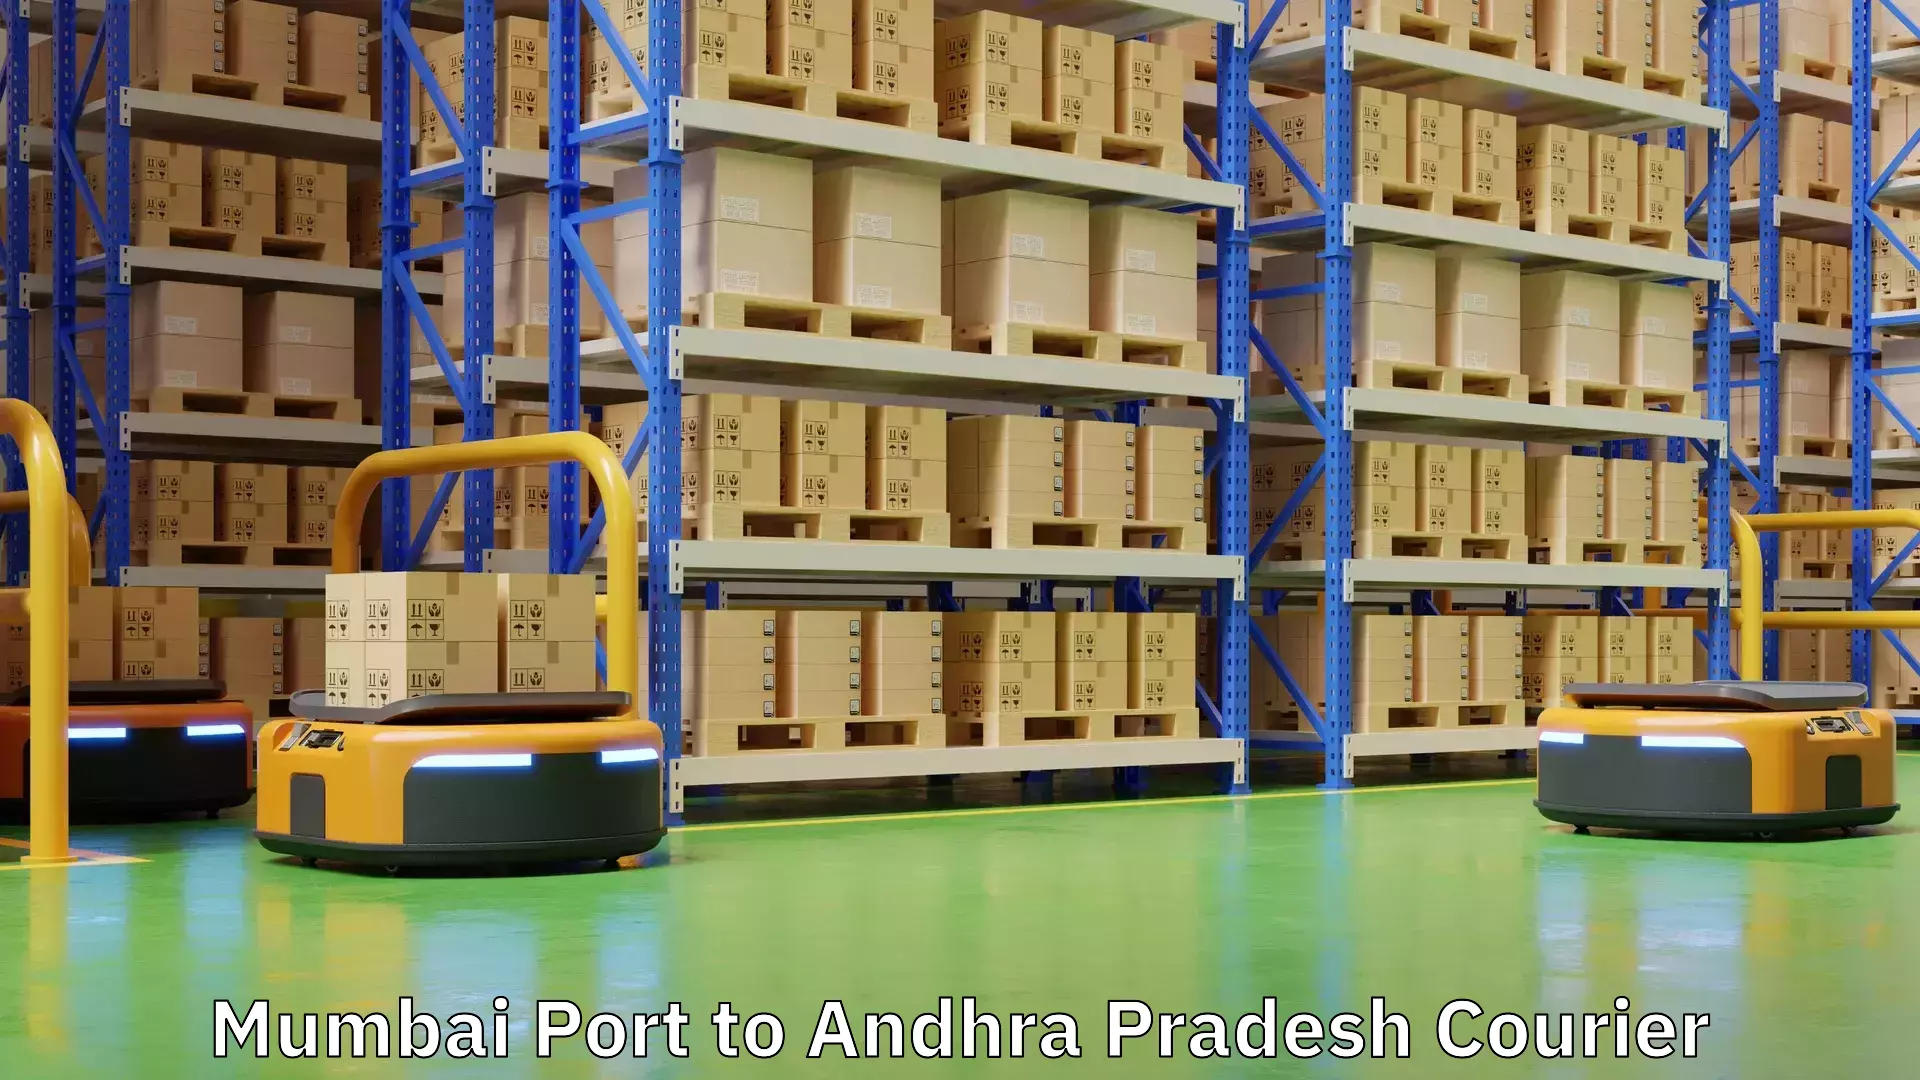 Modern delivery technologies in Mumbai Port to Andhra Pradesh